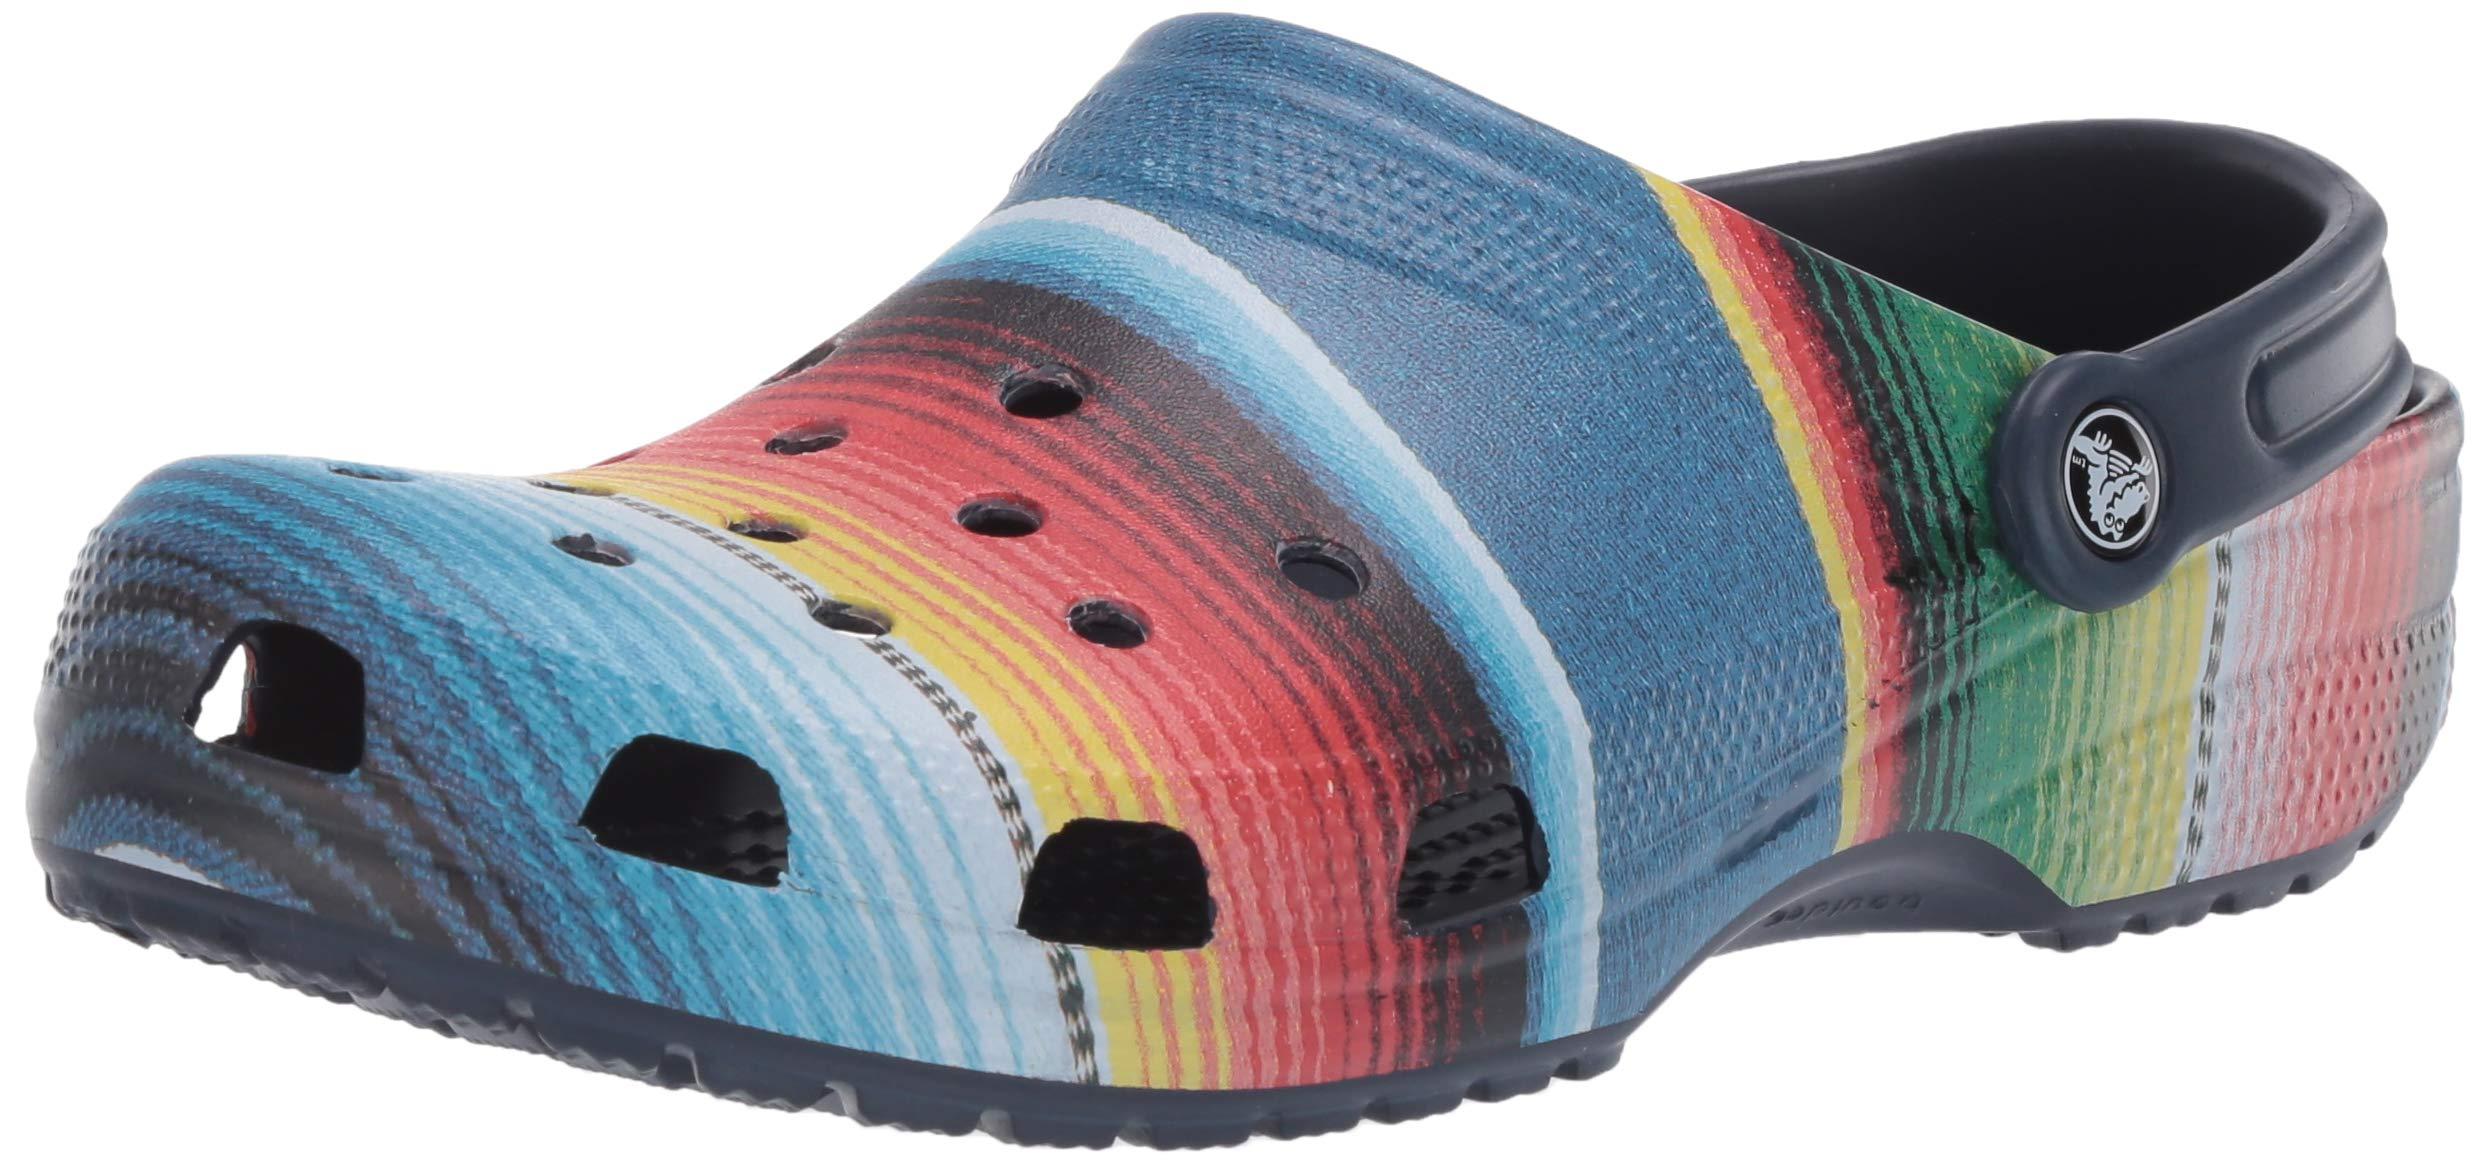 Crocs Womens Classic Clog|Comfortable Slip on Casual Water Shoes Clog